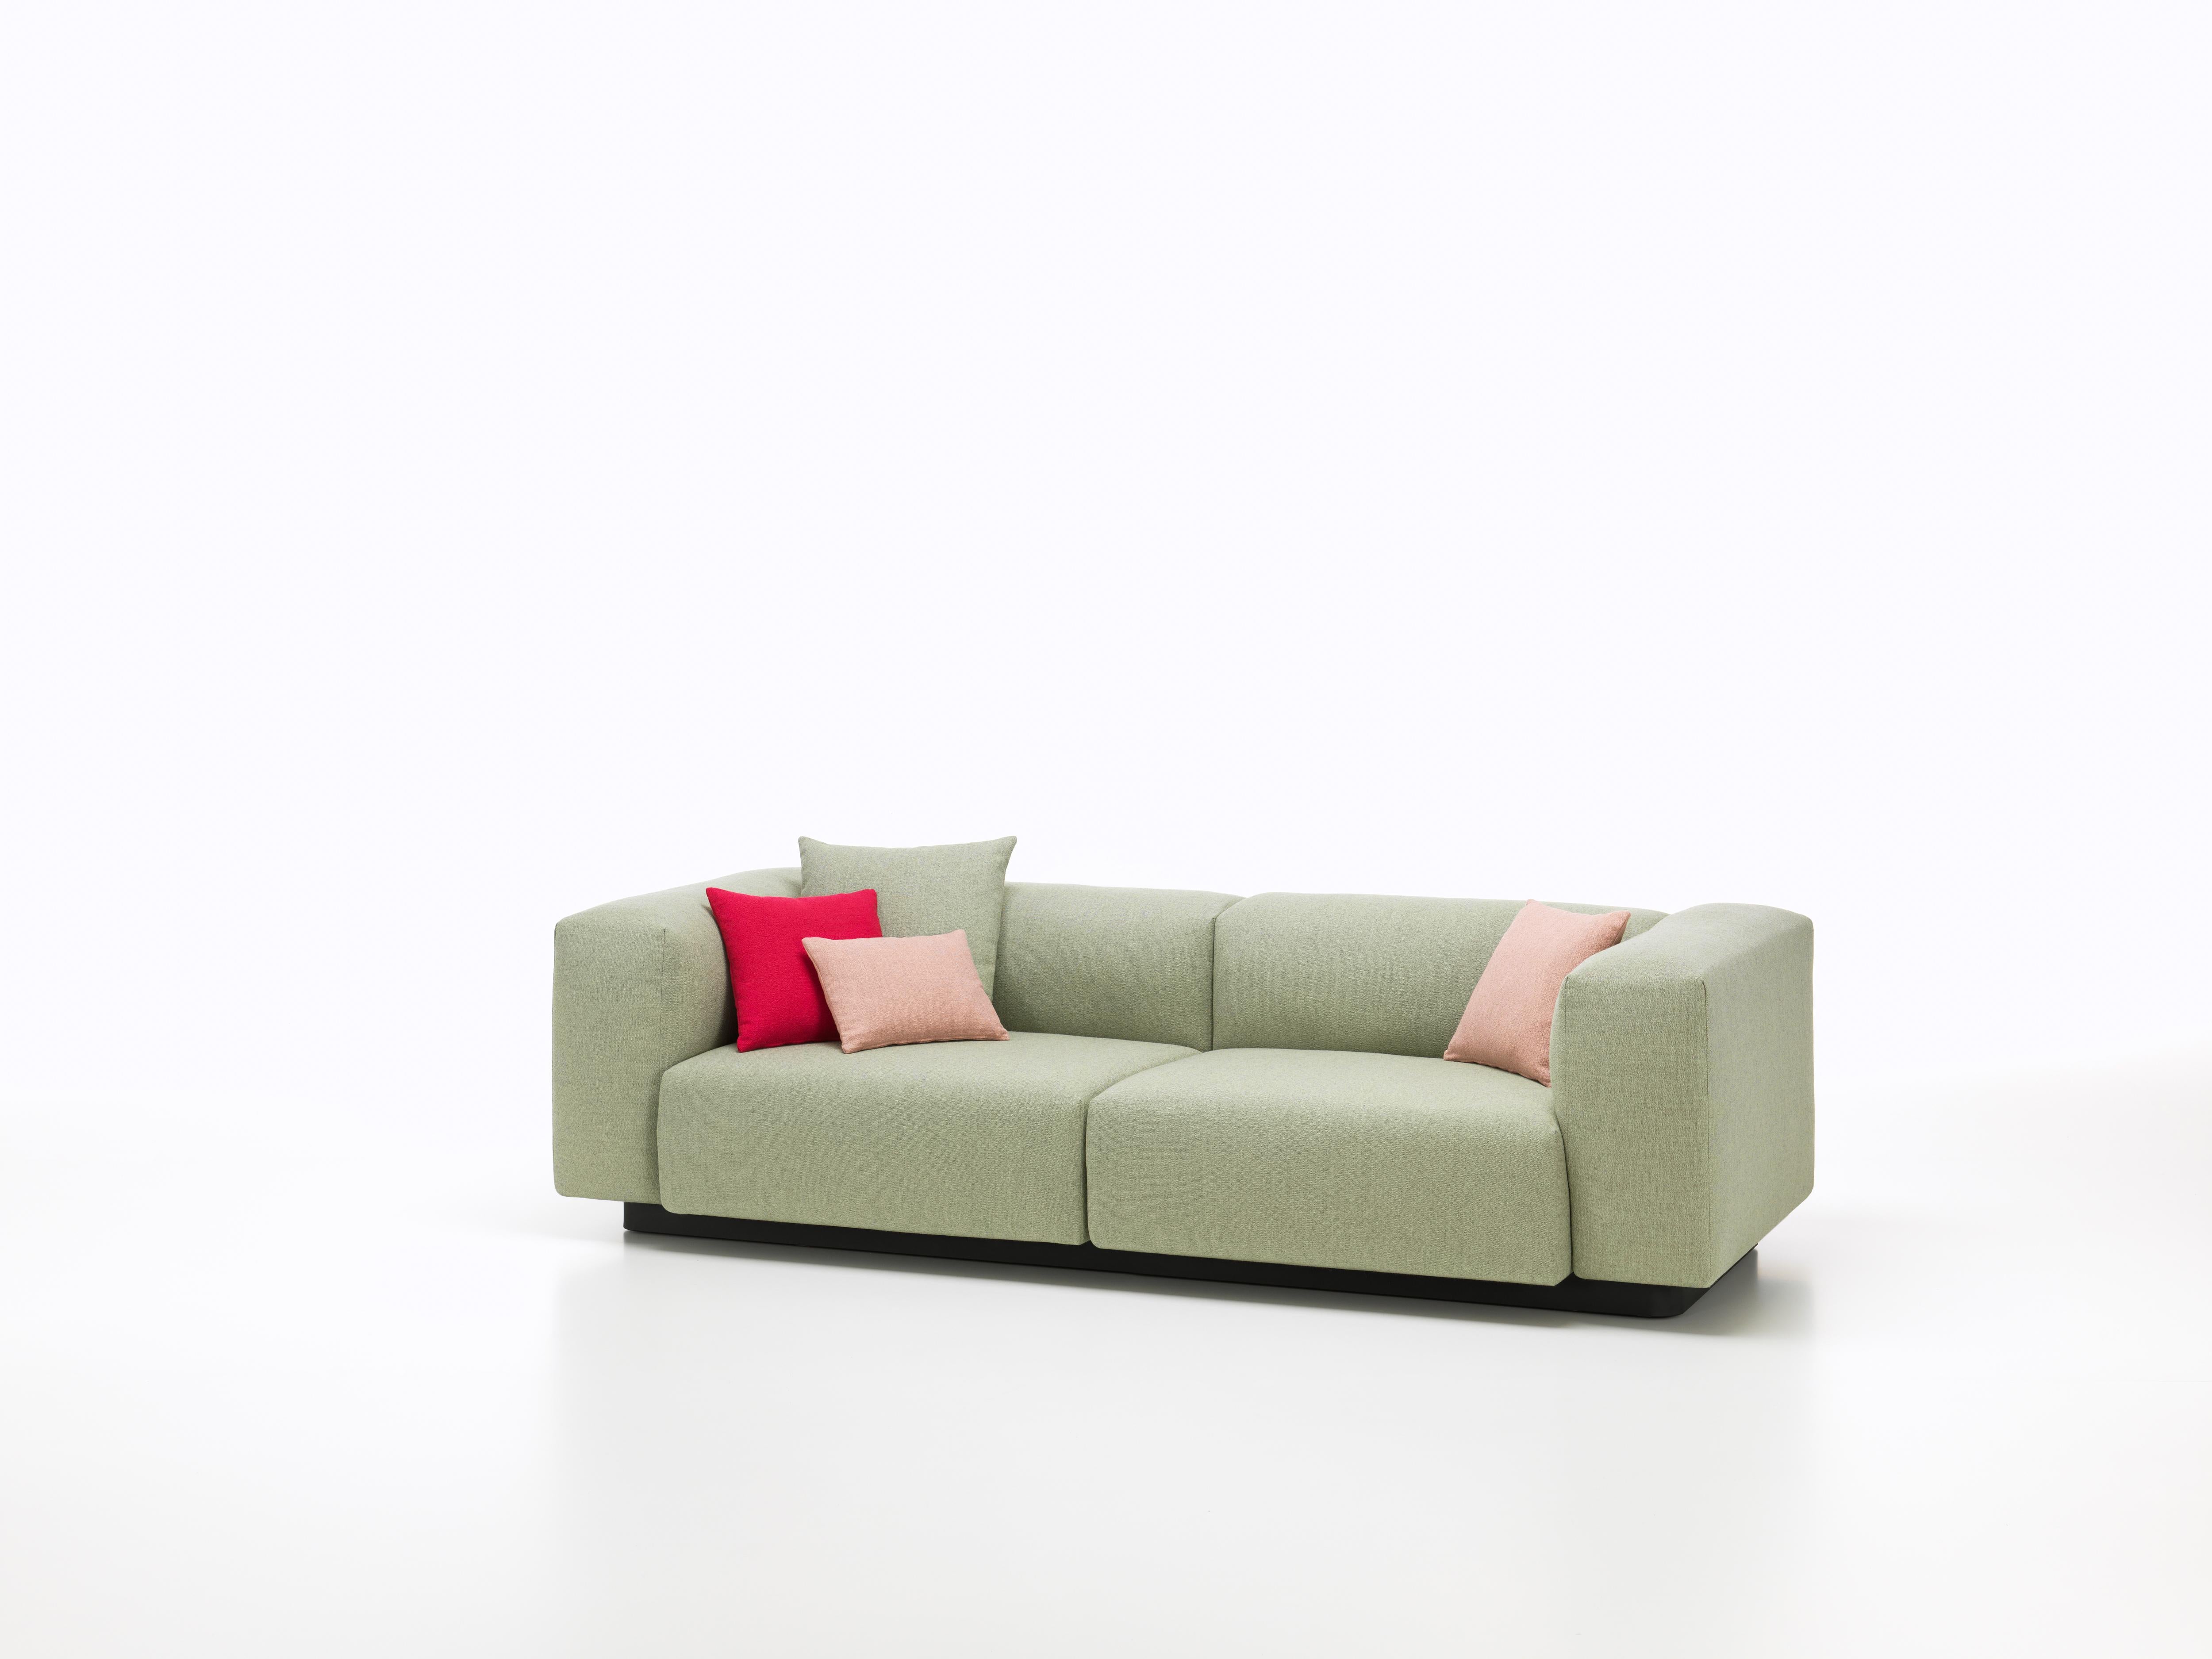 These items are only available in the United States.

The Soft Modular Sofa is Jasper Morrison‘s updated interpretation of what has become a modern Classic: the low-slung modular sofa with a decidedly horizontal emphasis. Uniting carefully